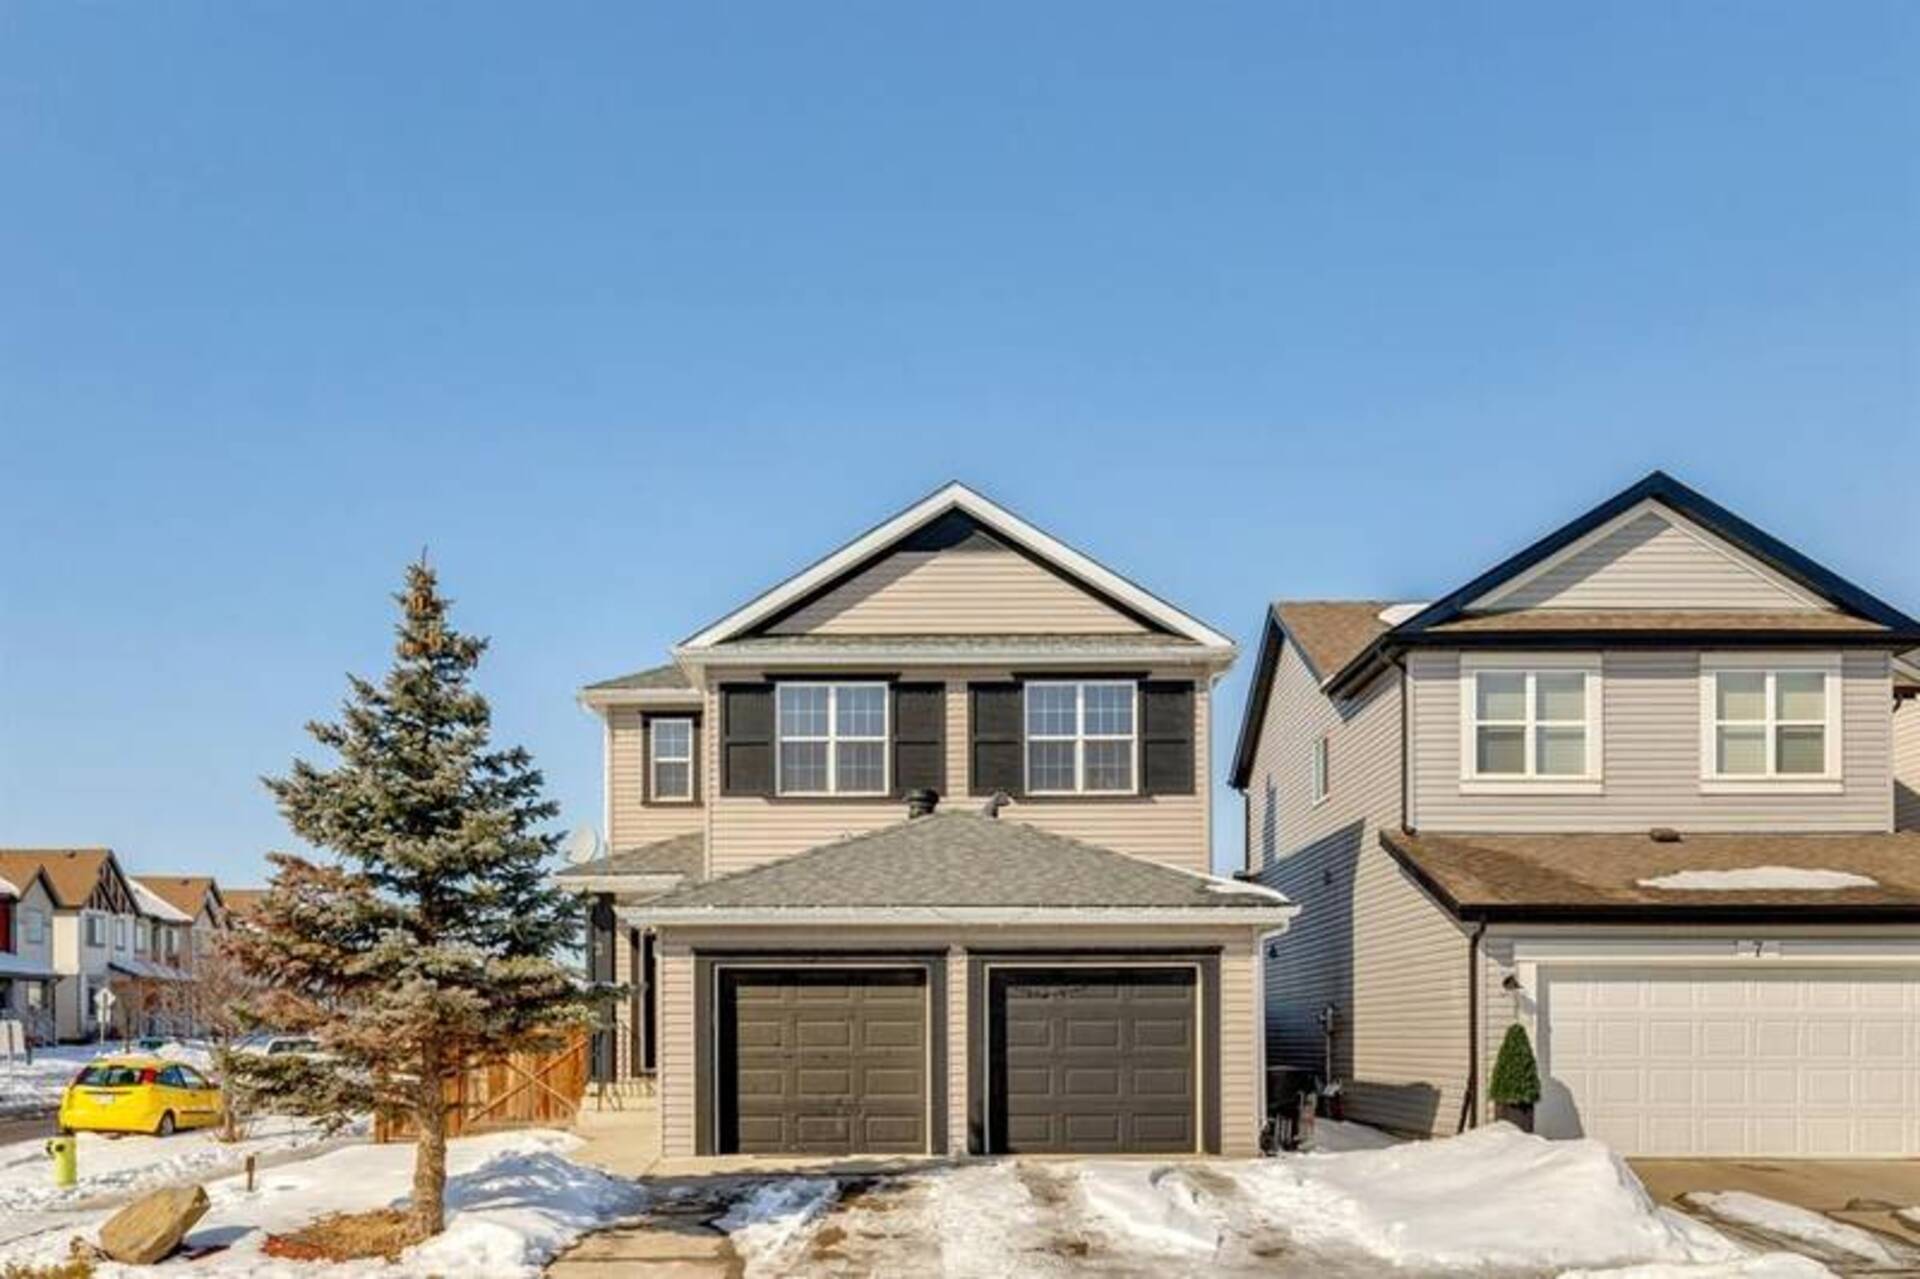 3 COPPERSTONE Way SE 